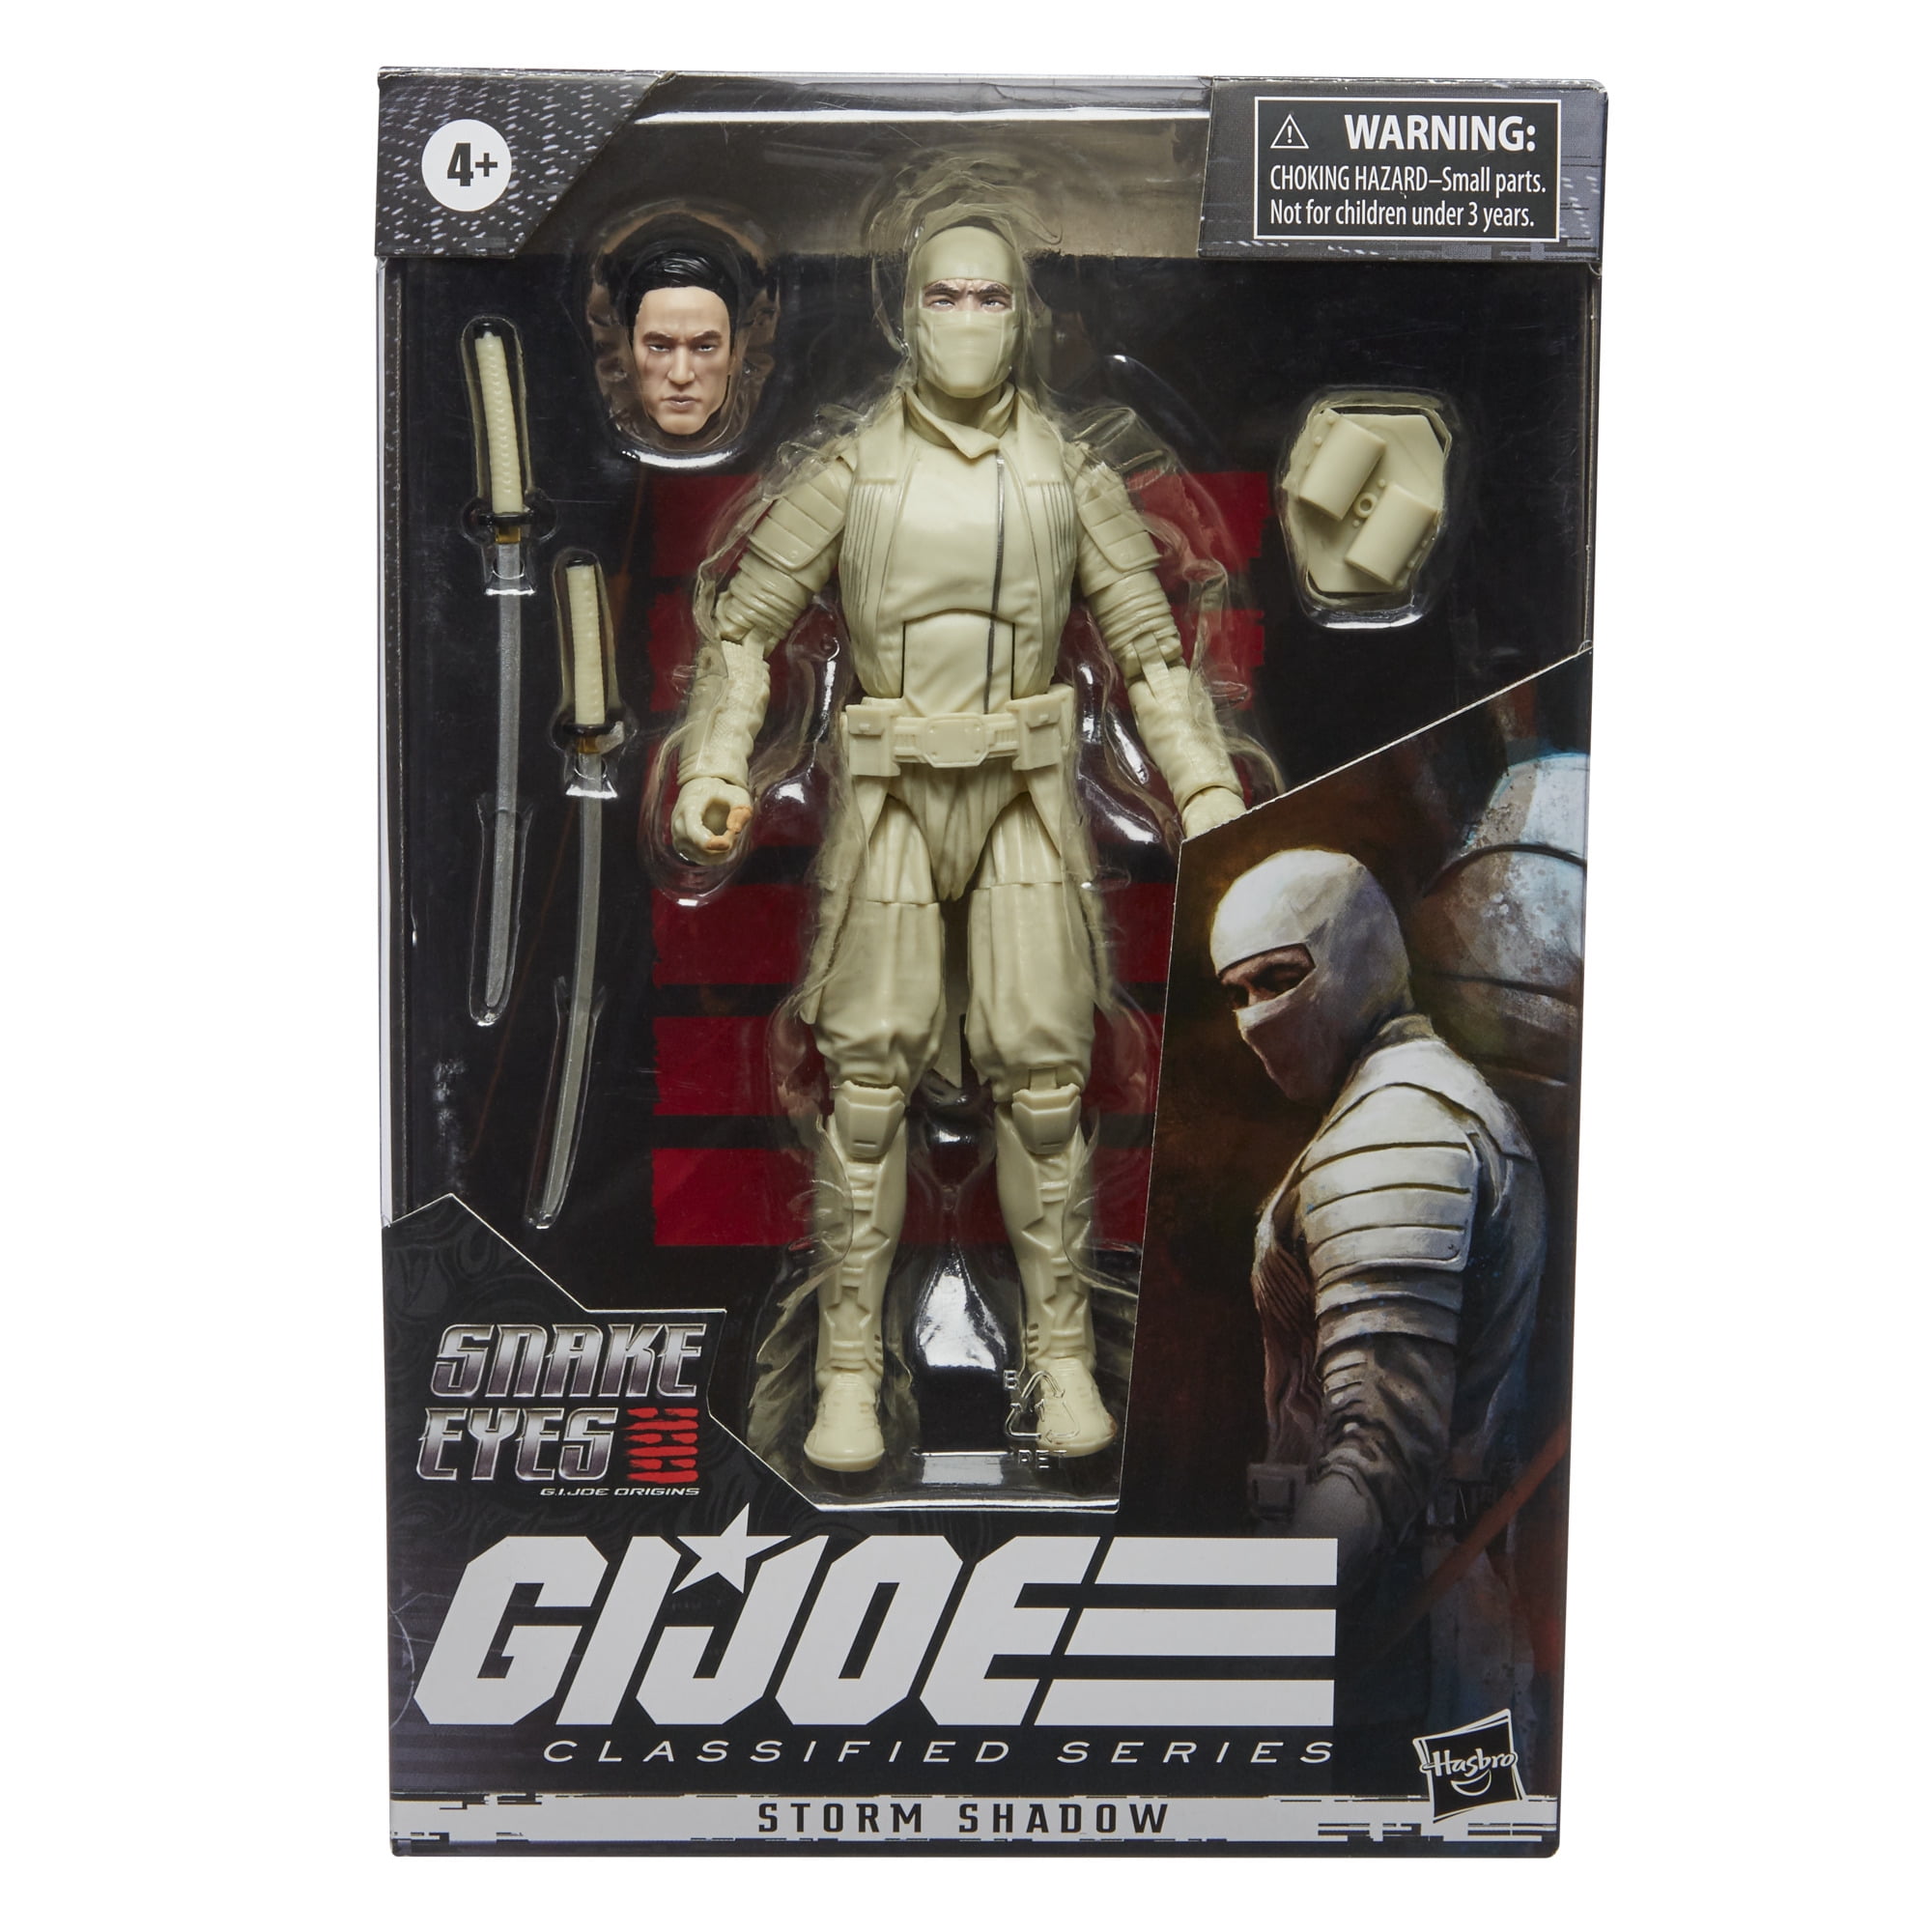 Hasbro Storm Shadow 3.75 inch Collectible with Accessories Action Figure for sale online 